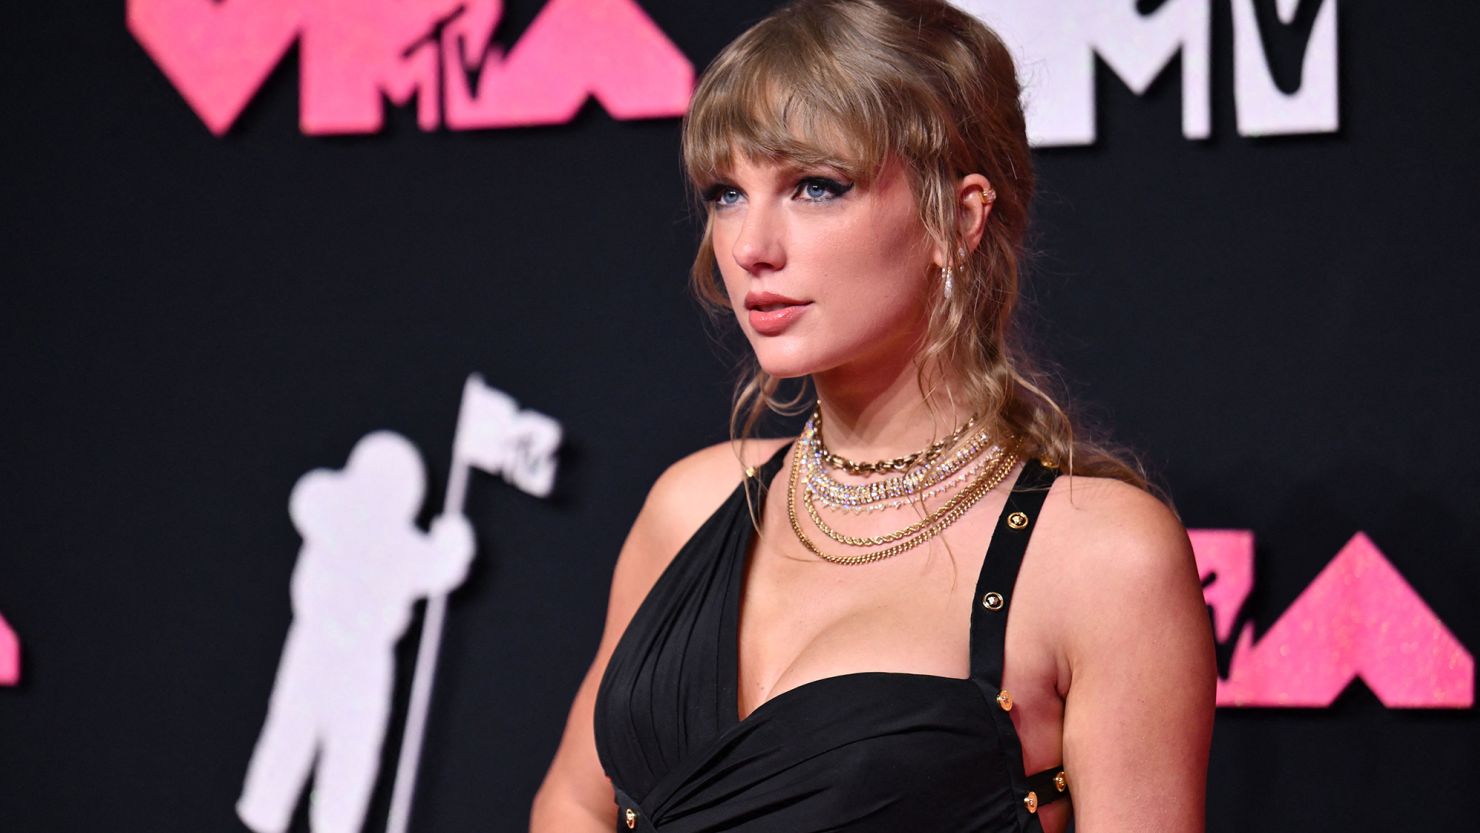 Taylor Swift arrived at the VMAs in a slinky, high-slit black Versace dress with gold button embellishments.